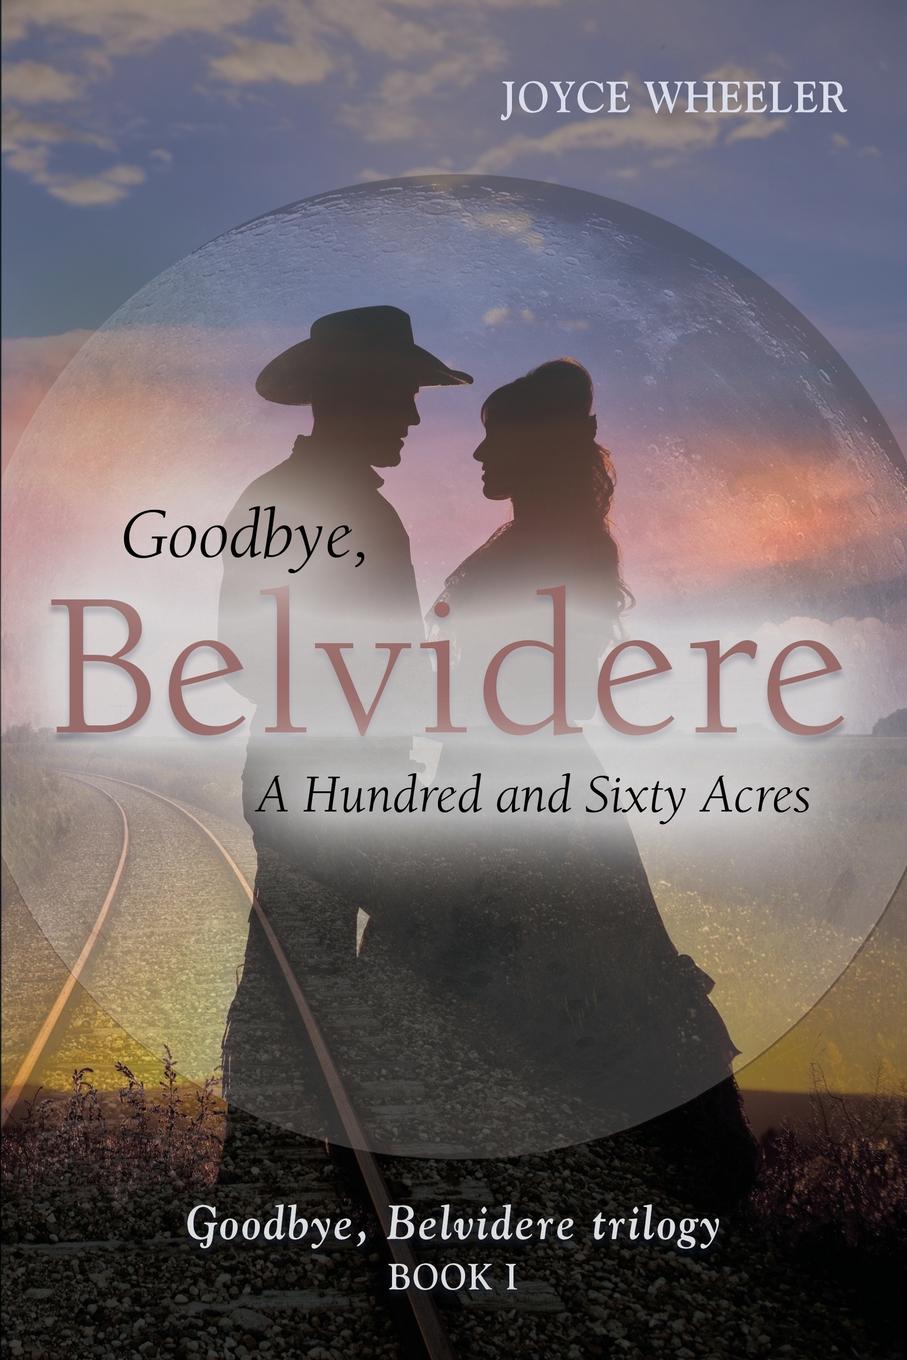 Goodbye, Belvidere. A Hundred and Sixty Acres